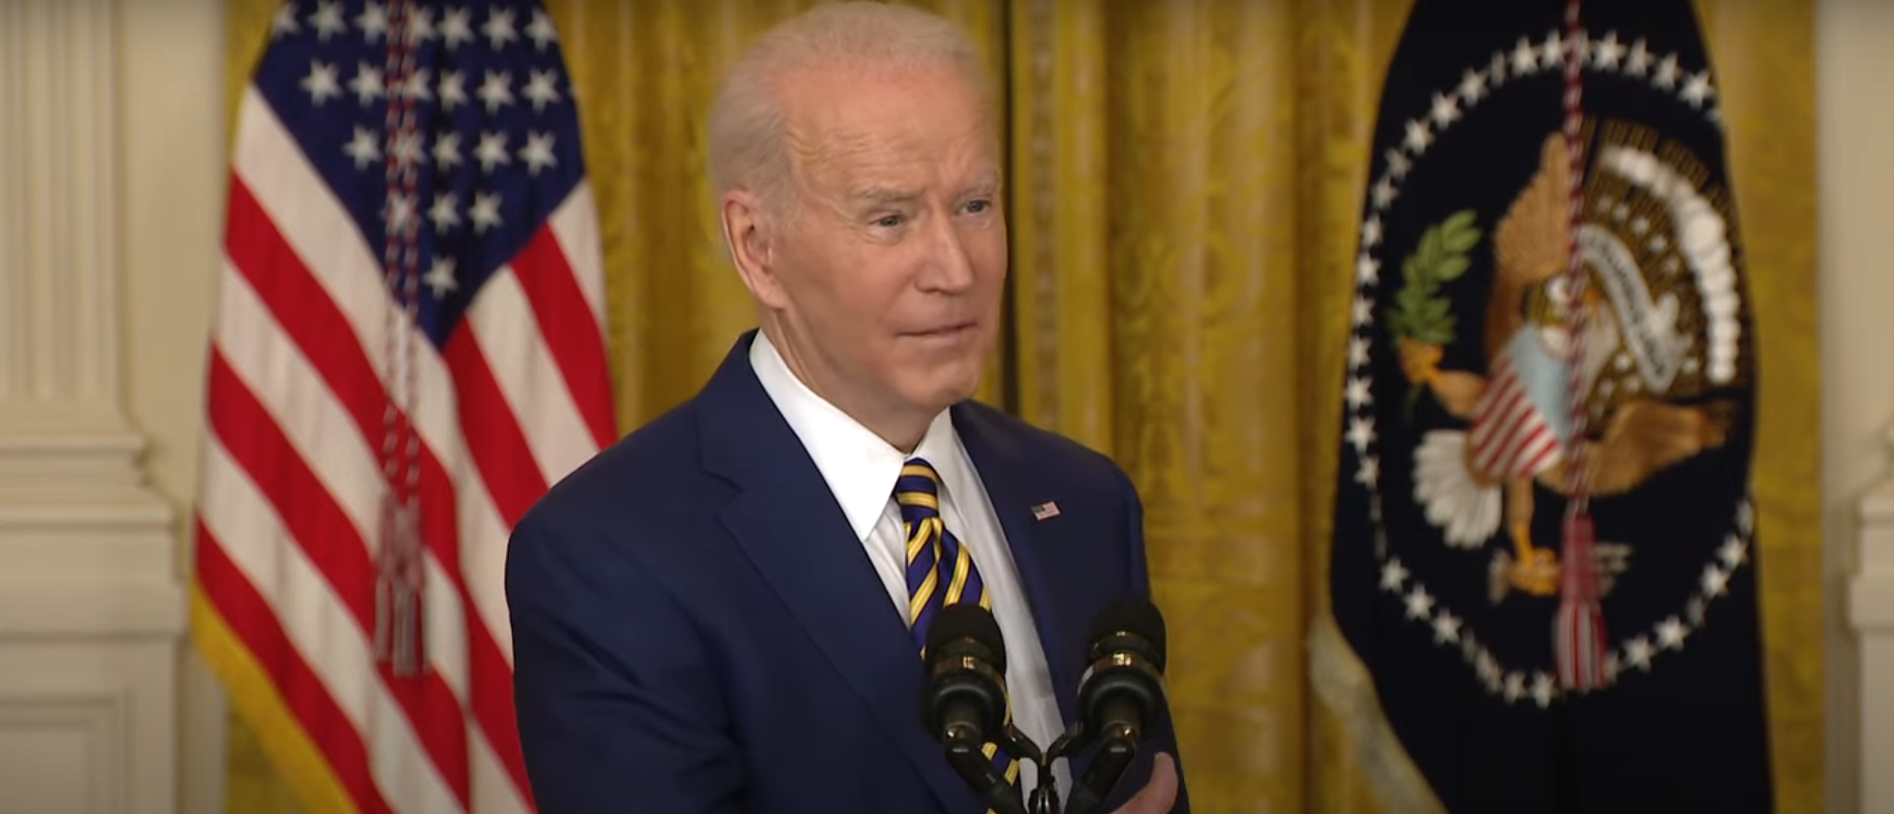 Biden Touts That ‘89%’ Of Grocery Store Shelves Are ‘Full’